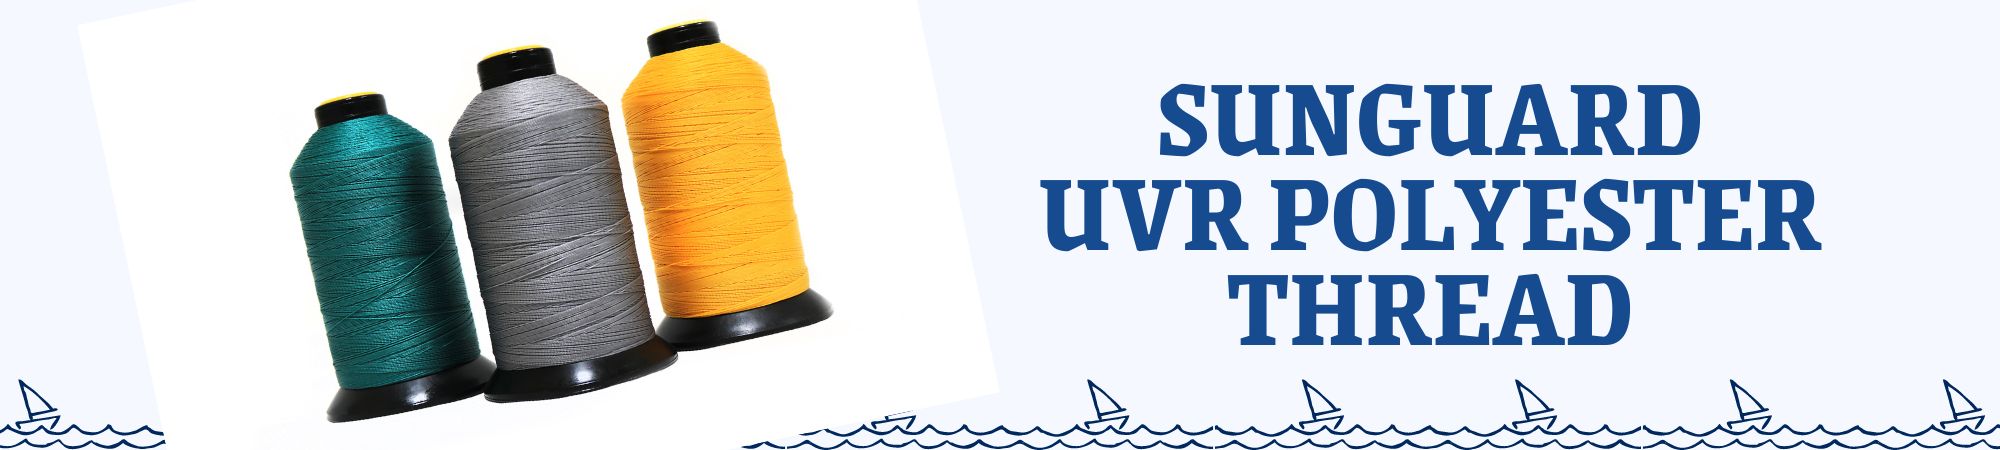 Click here to shop our Sunguard UVR protected thread!